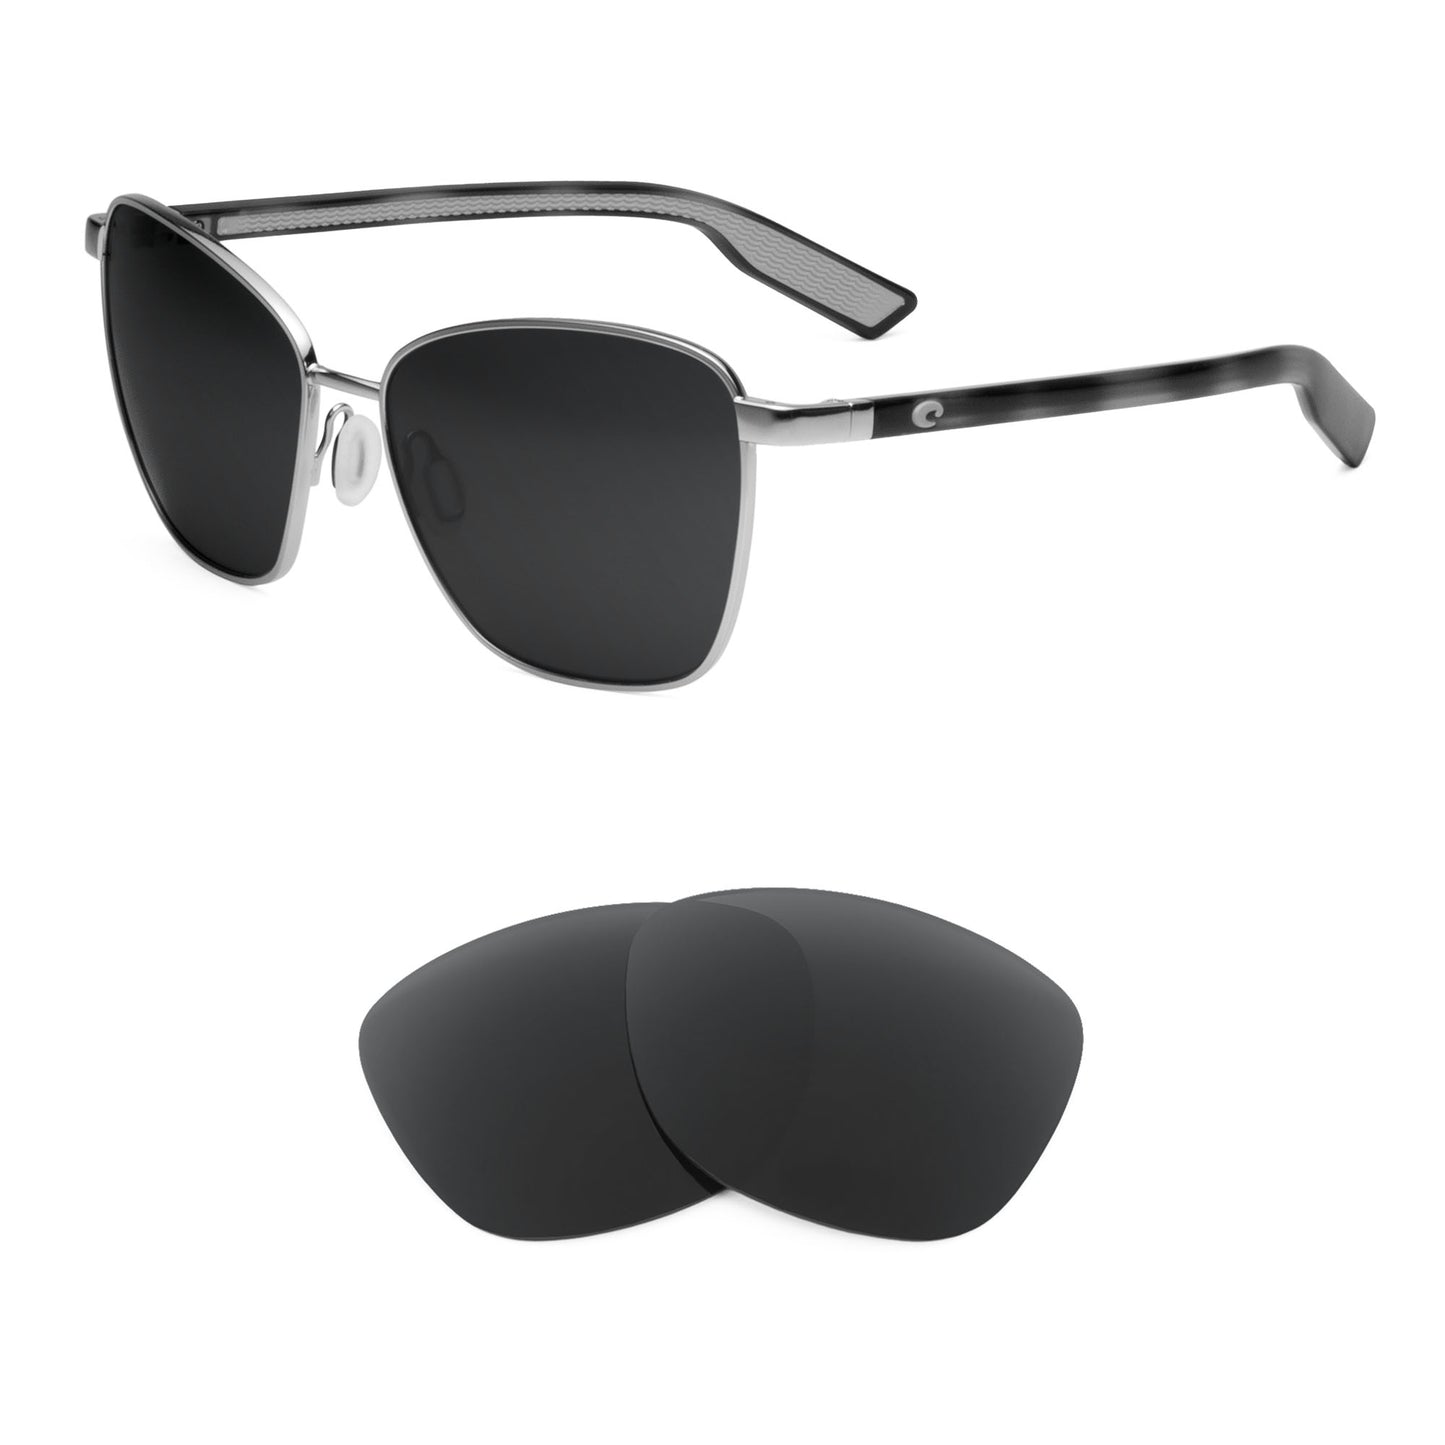 Costa Paloma sunglasses with replacement lenses